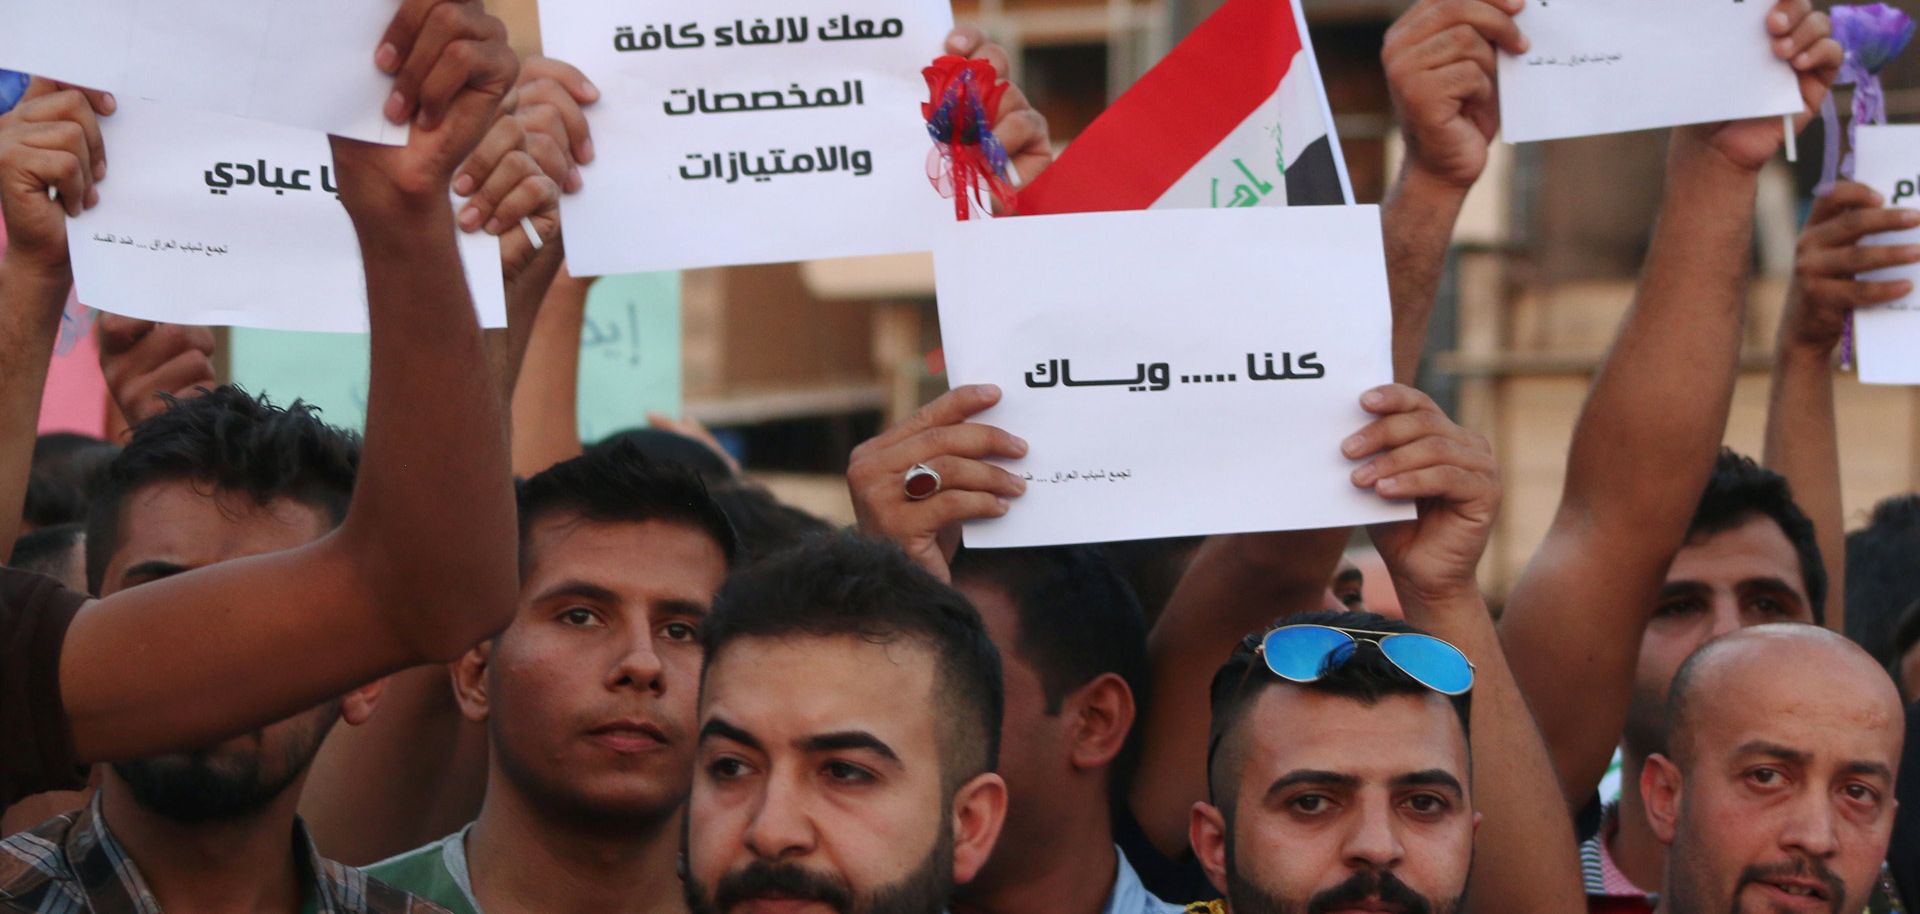 Attempts at Unification Could Divide Iraq More